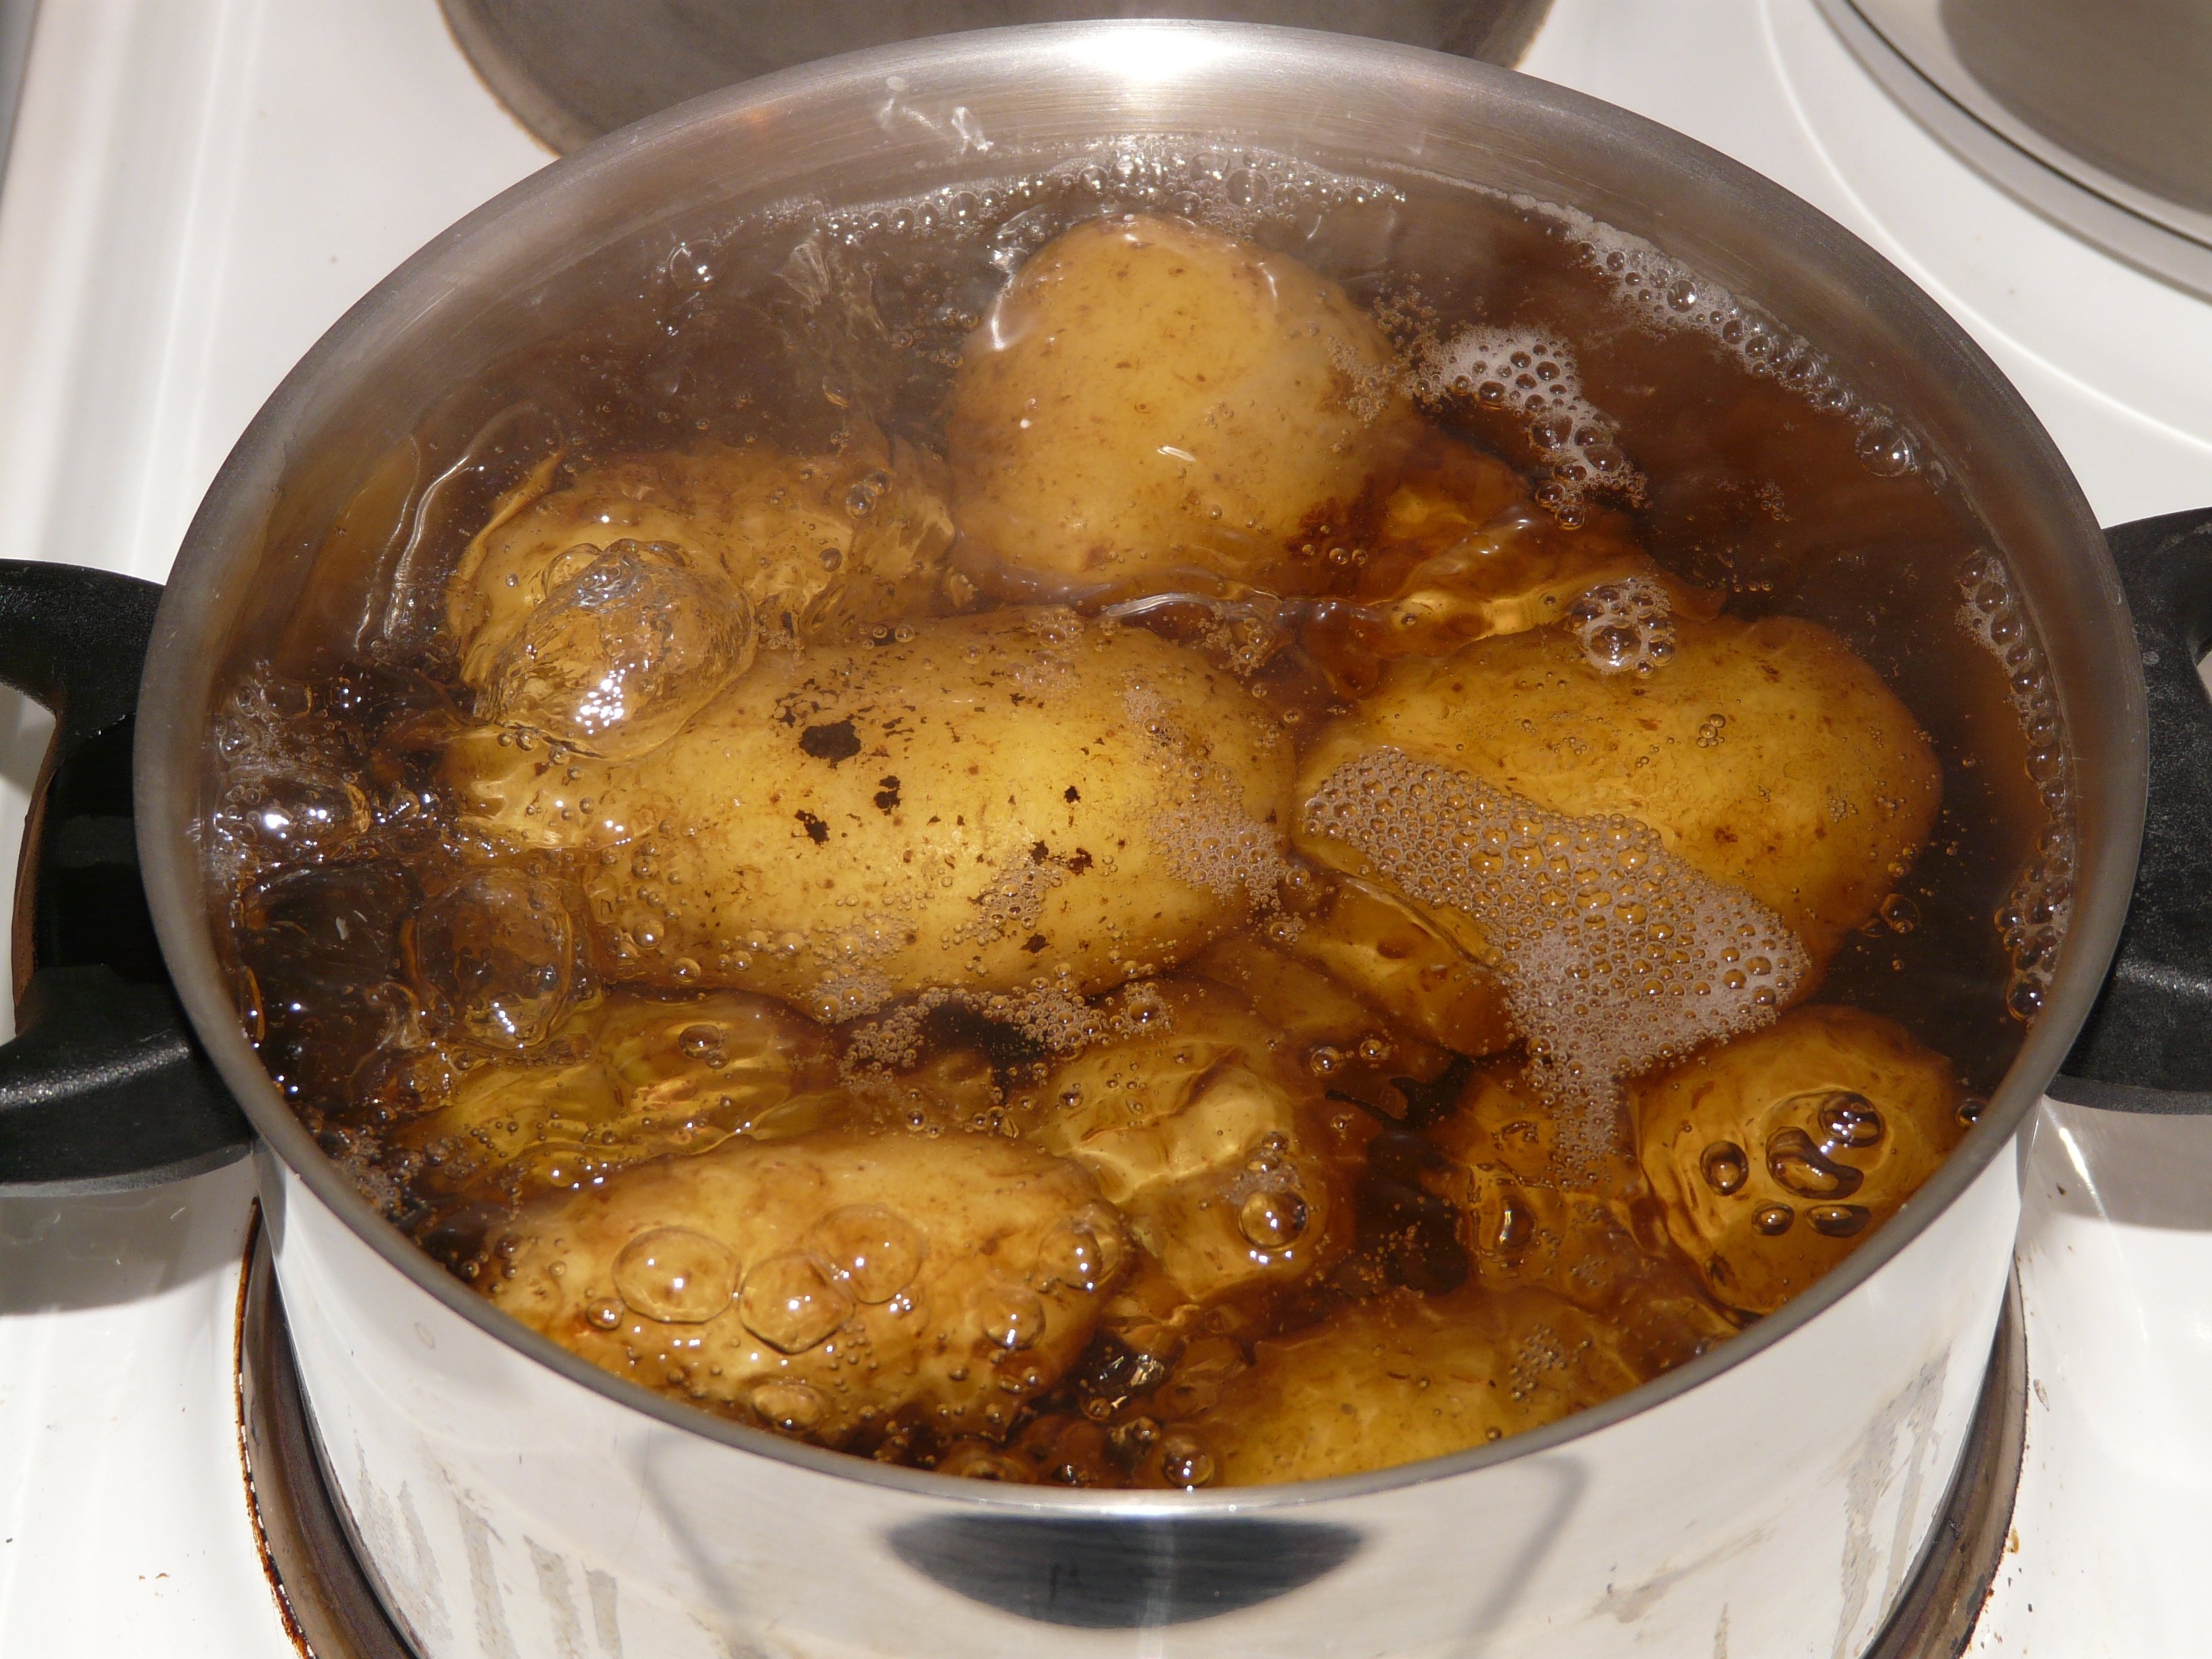 potato with stainless steel cooking pot